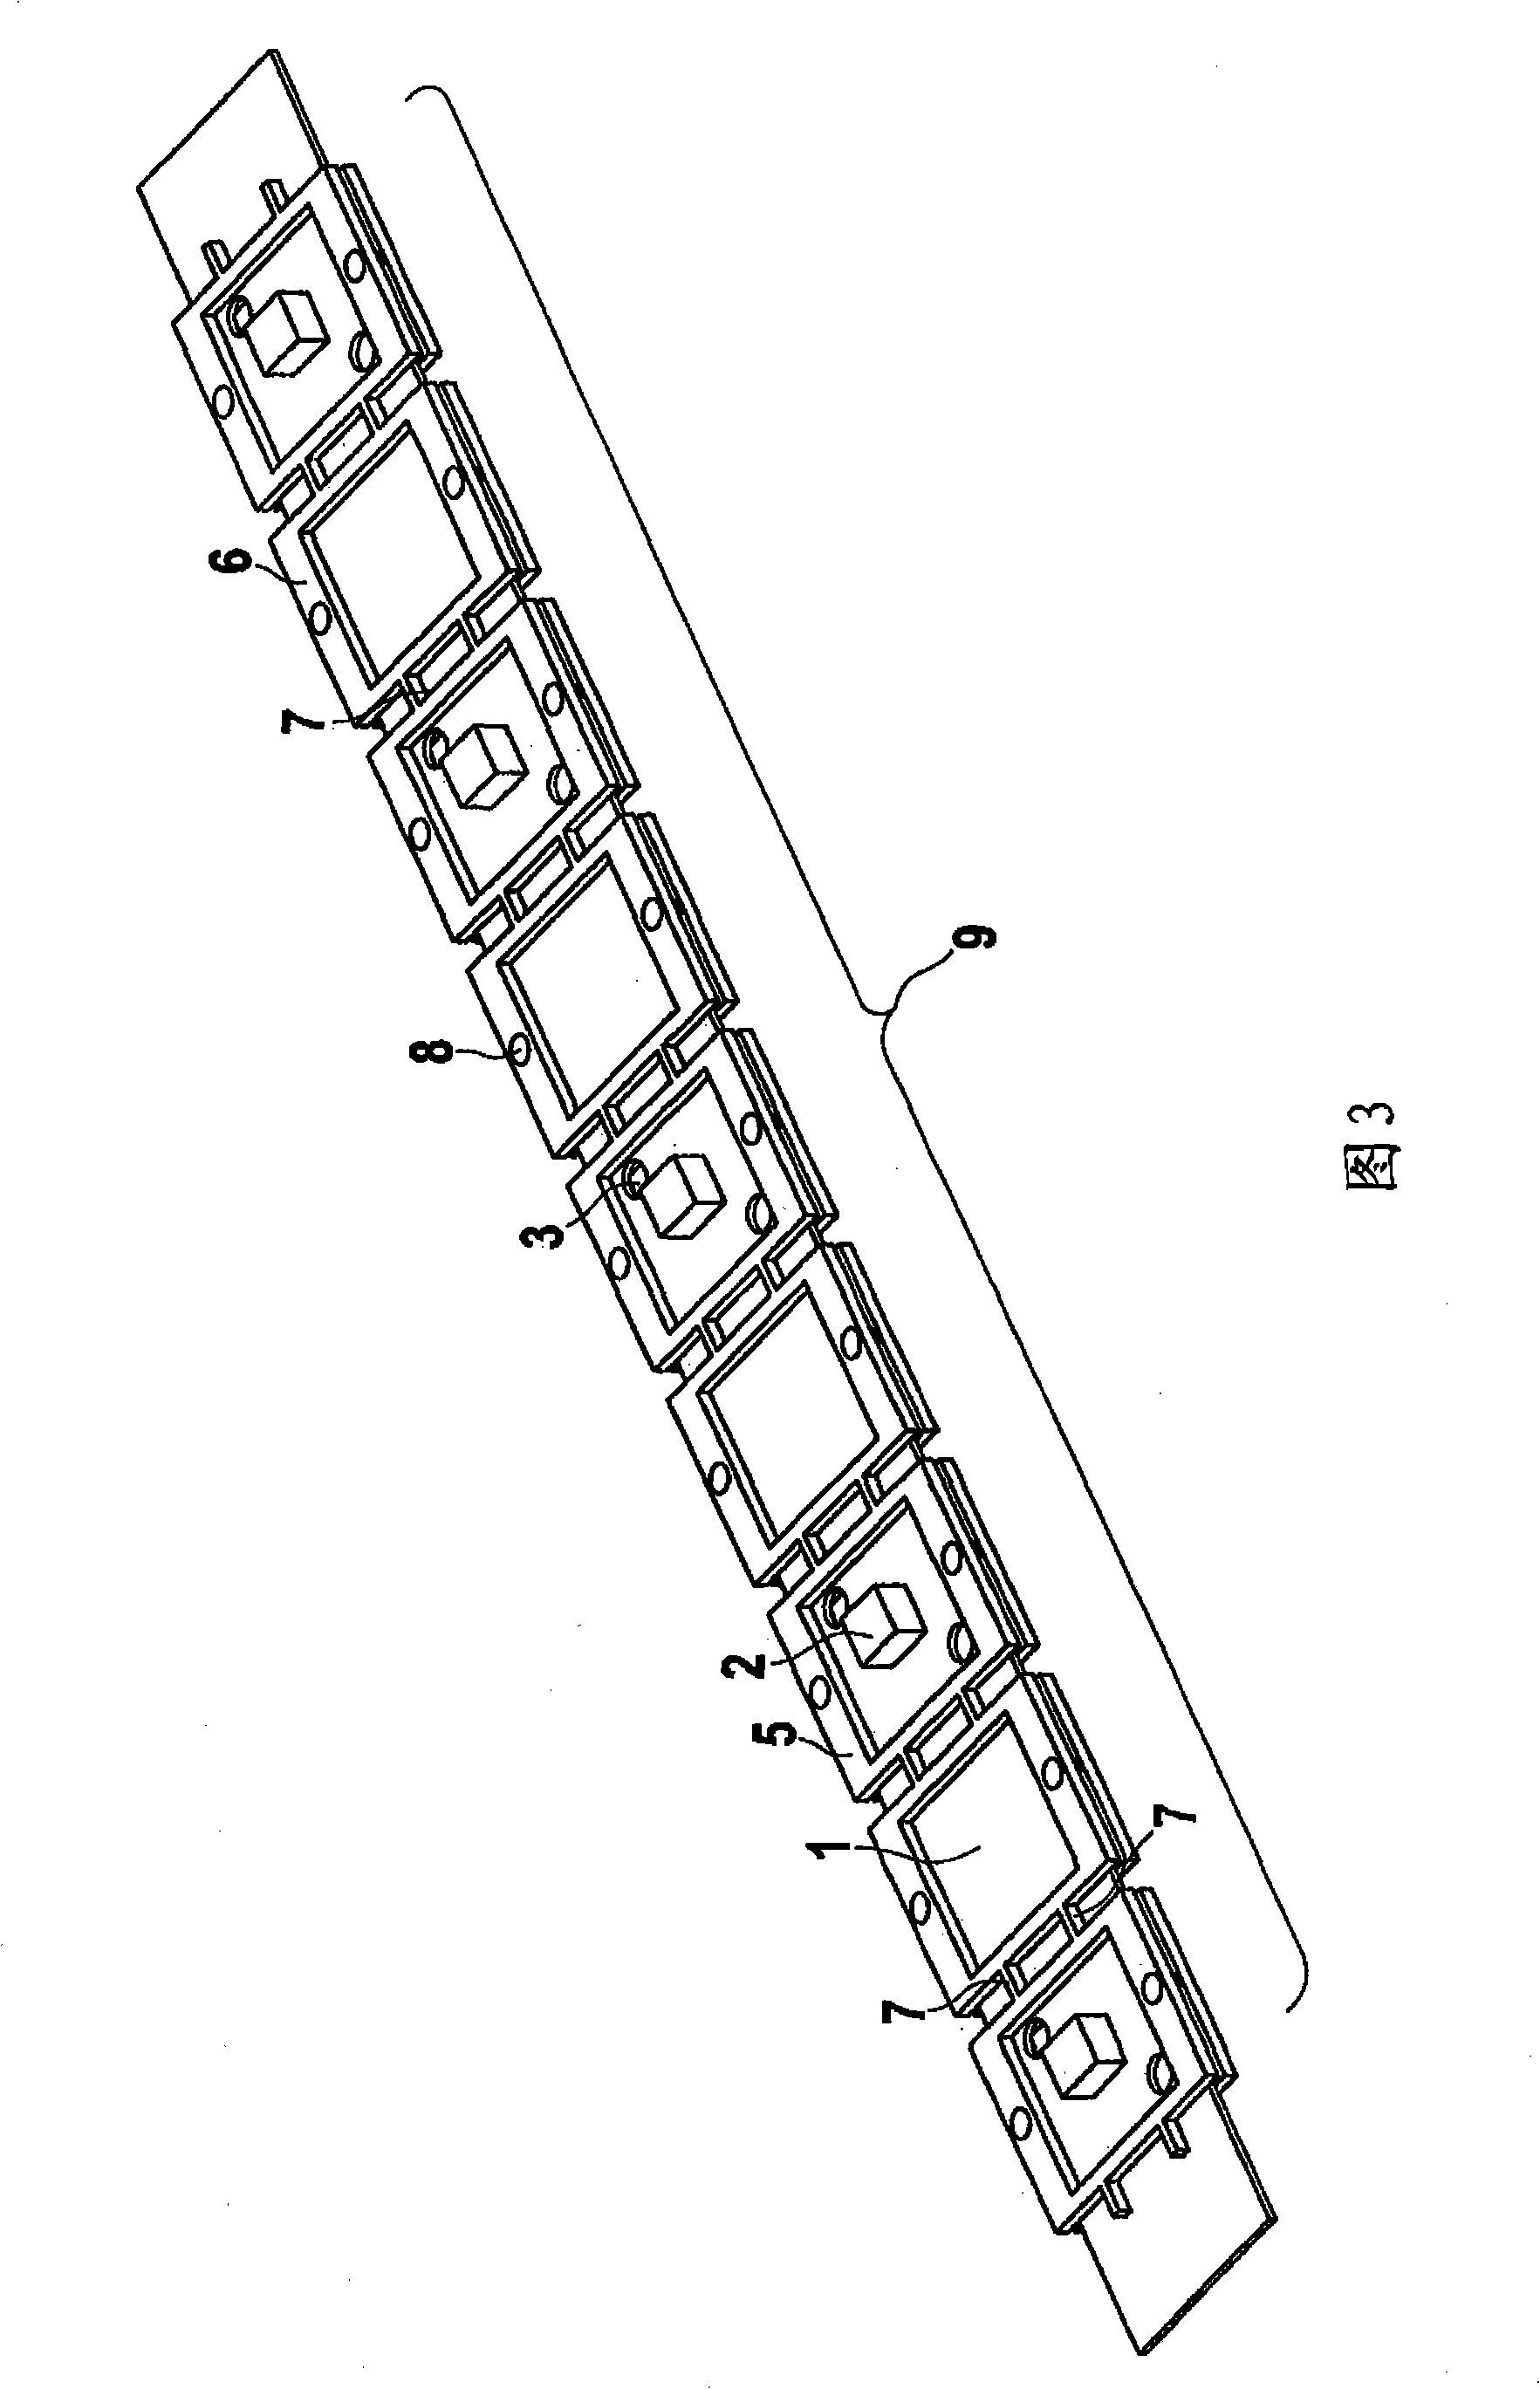 Lighting arrangement with semiconductor light sources on flexible printed circuits